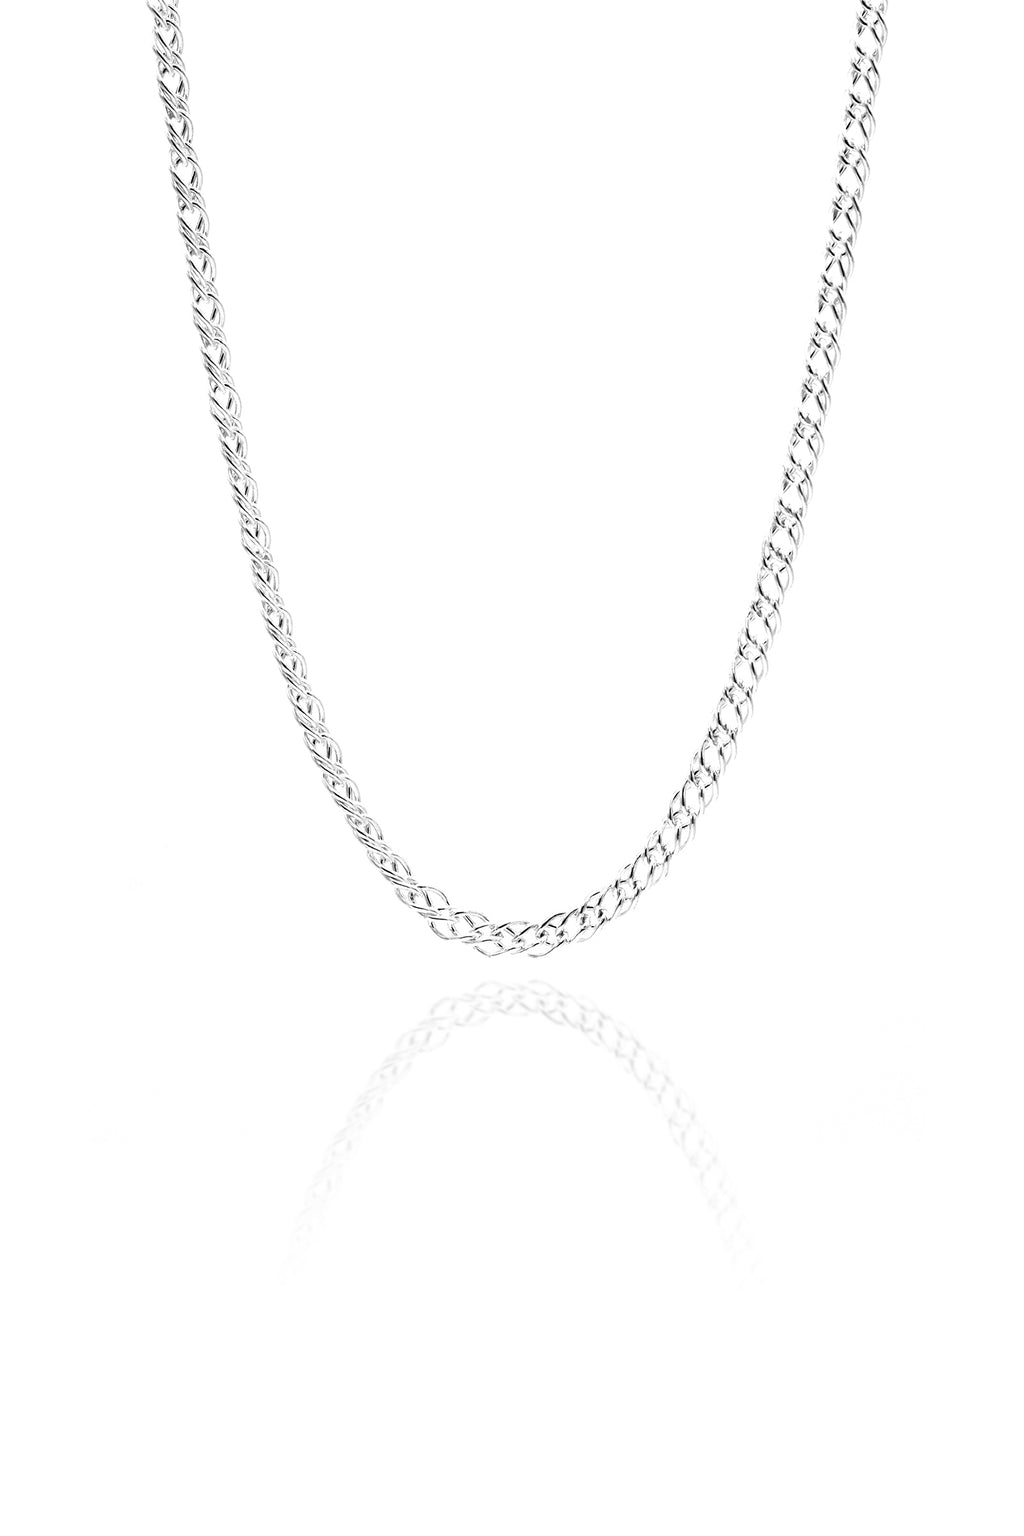 Handmade Curb Chain Silver Necklace (NG201019588)